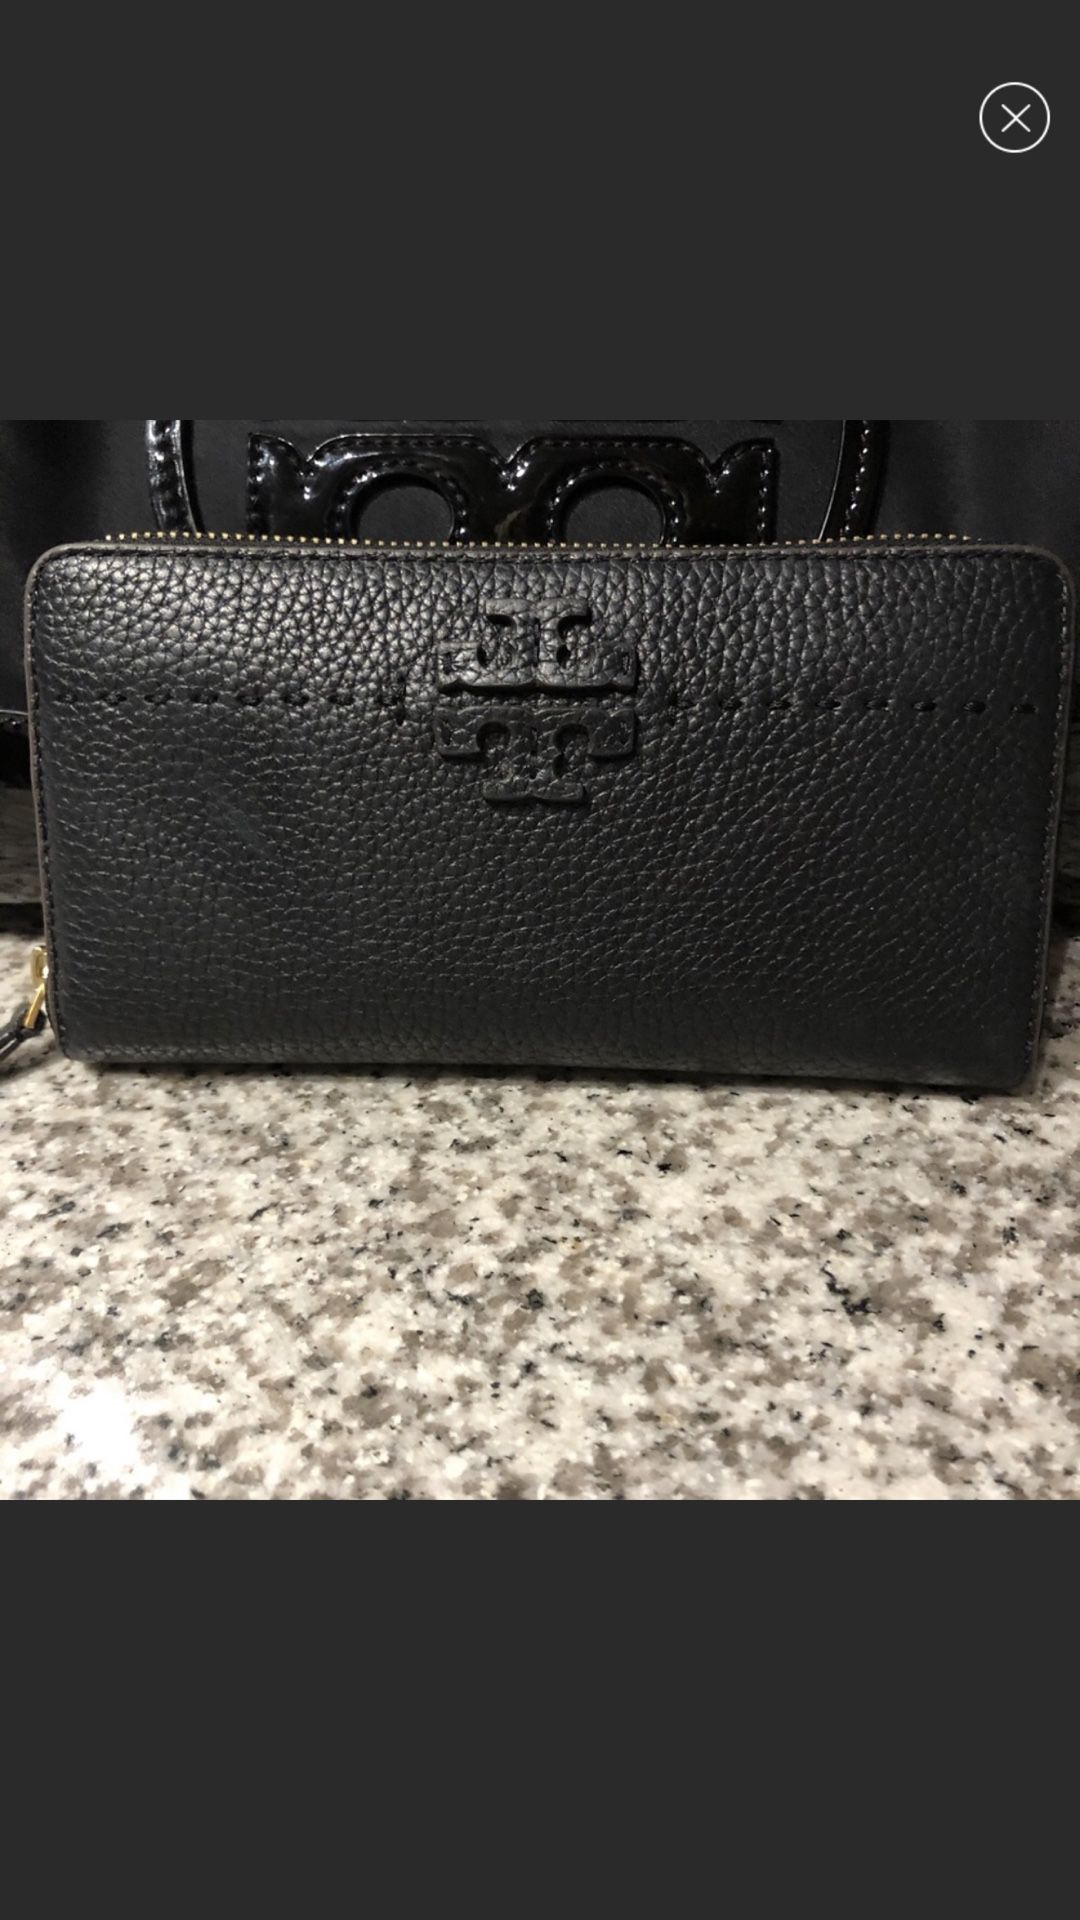 Tory Burch Leather Like New Wallet